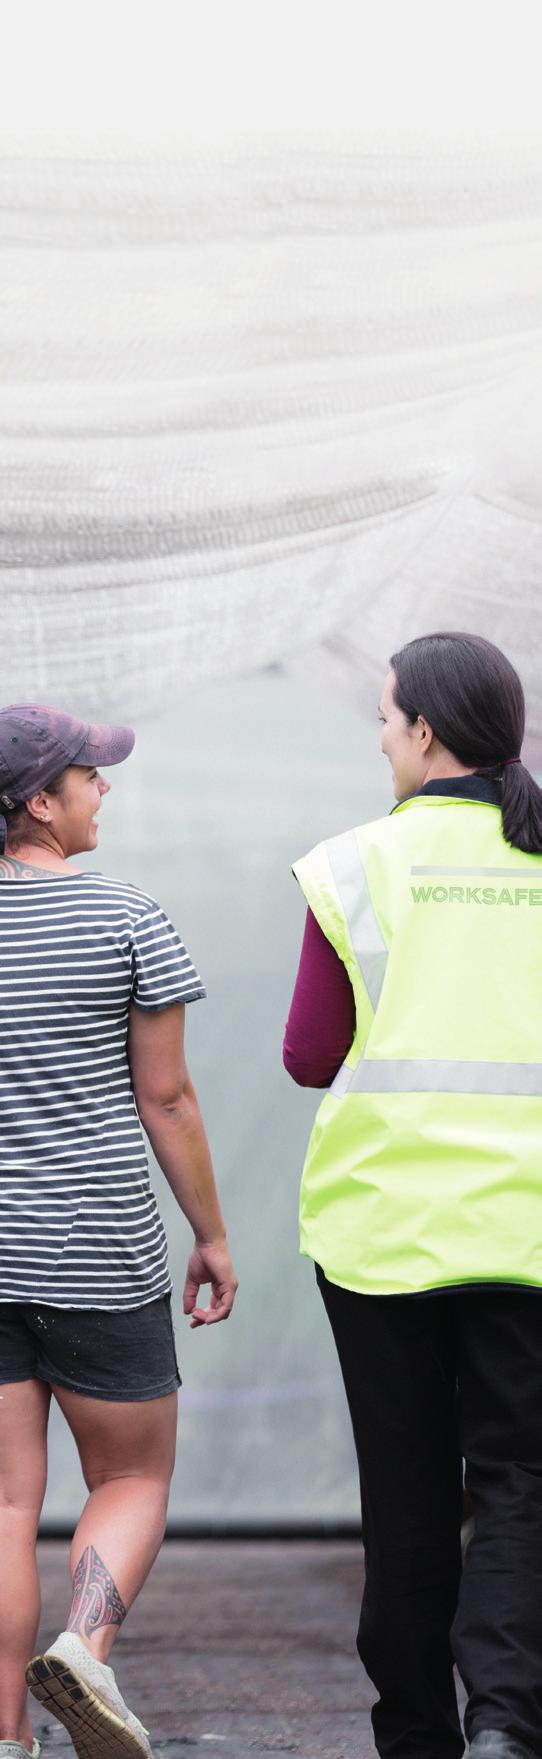 Over time, more workers and employers say they are aware of/know about WorkSafe and we are increasingly a source of advice on health and safety.